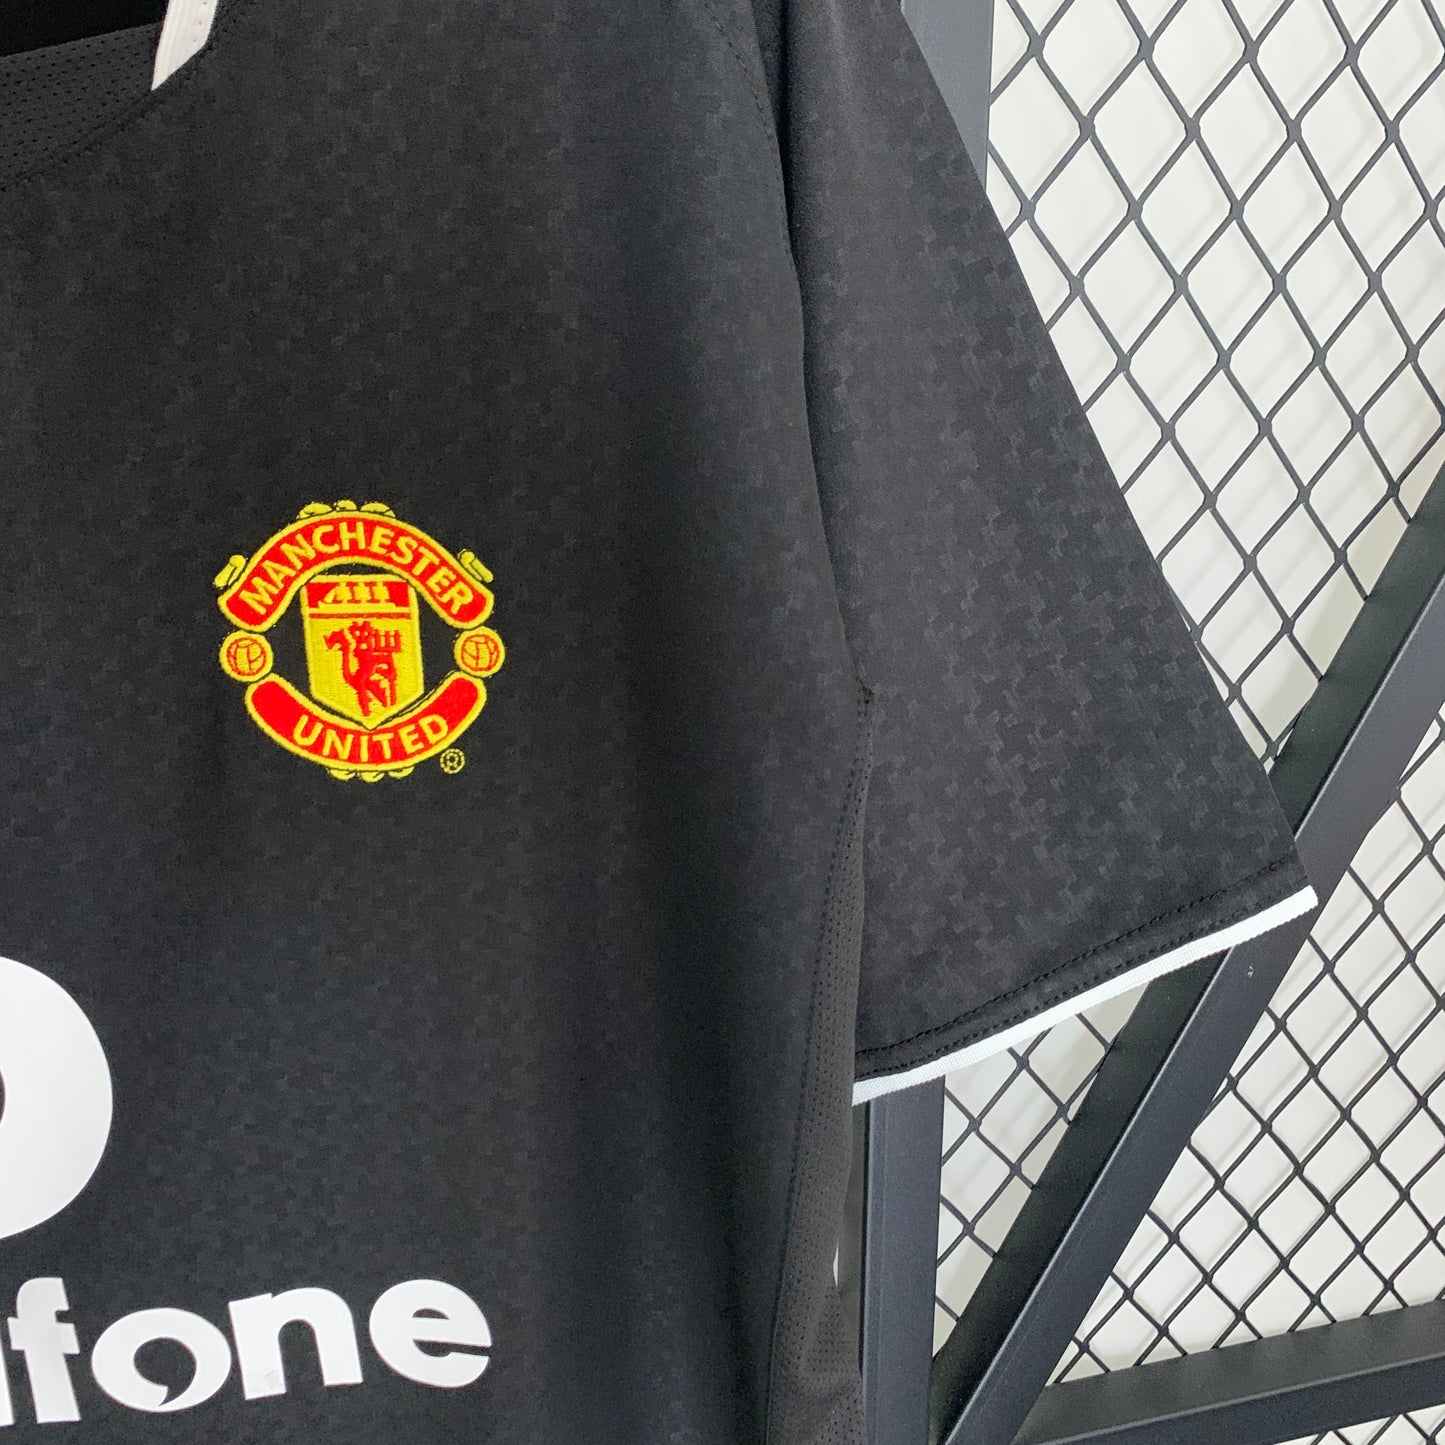 MANCHESTER UNITED 2003 - 2004 AWAY JERSEY